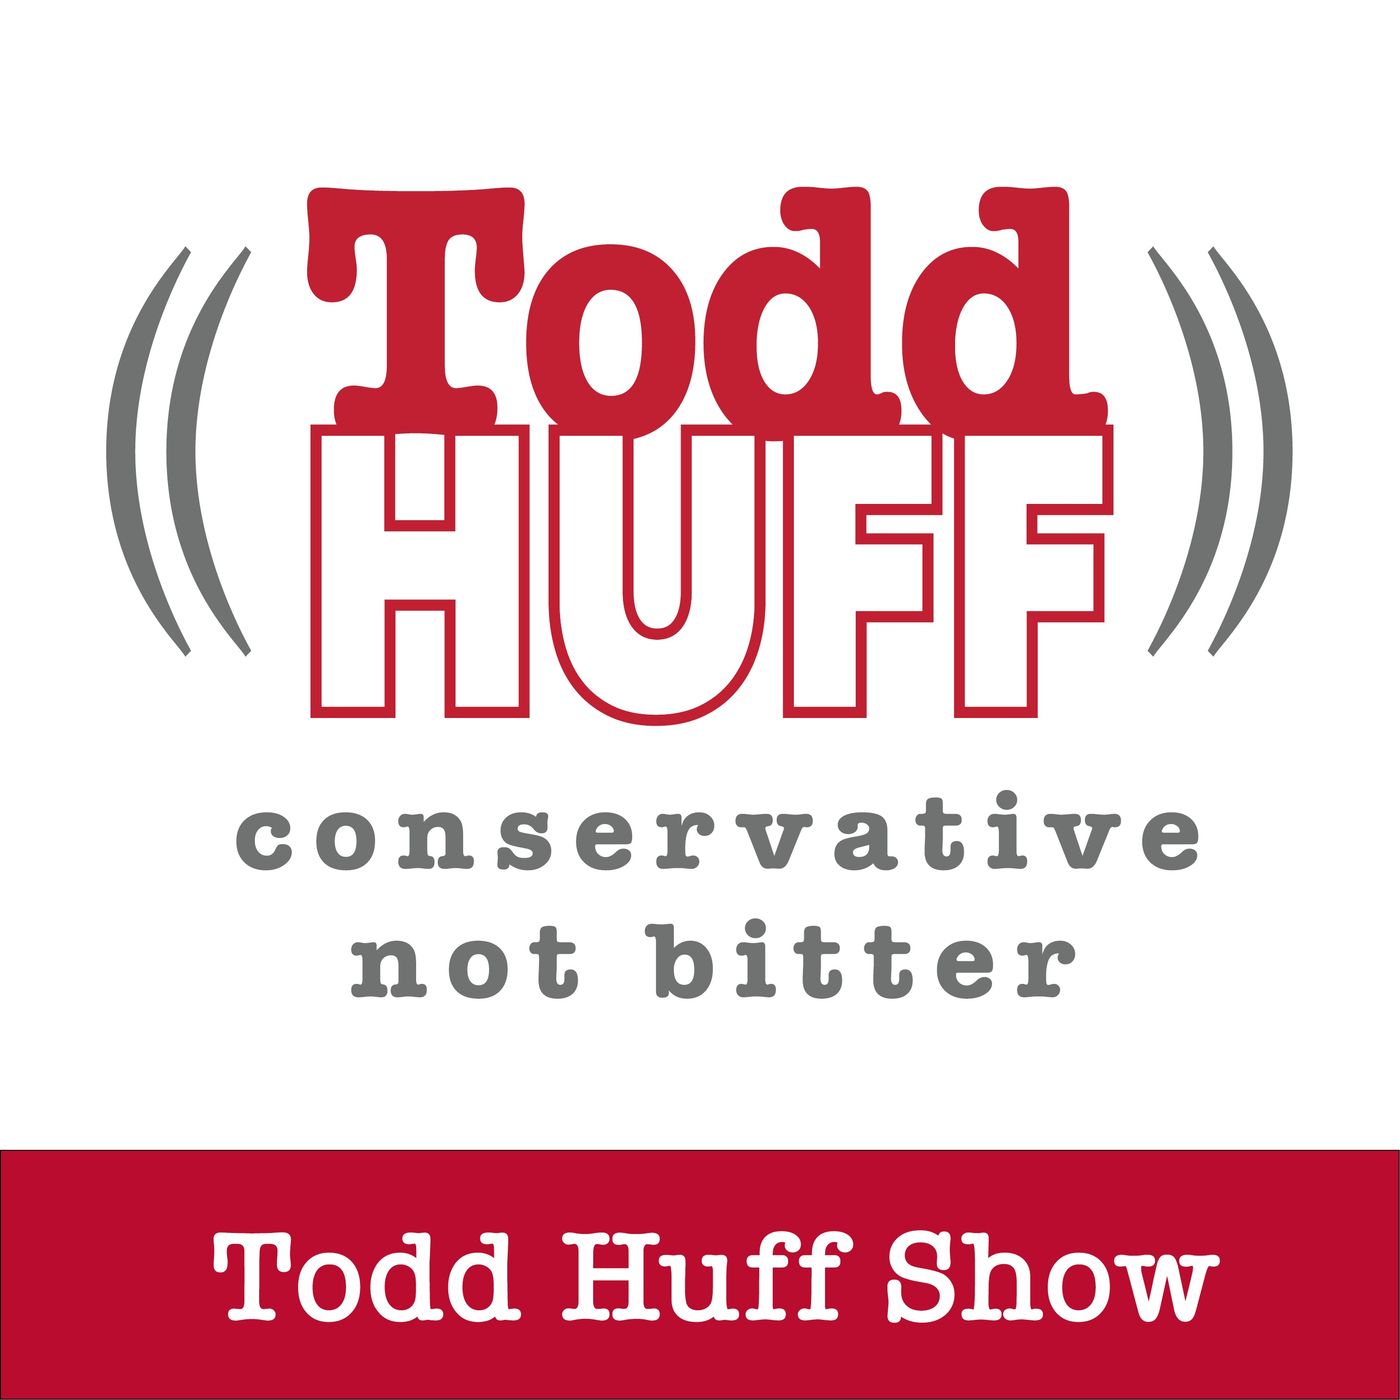 Todd Huff Show